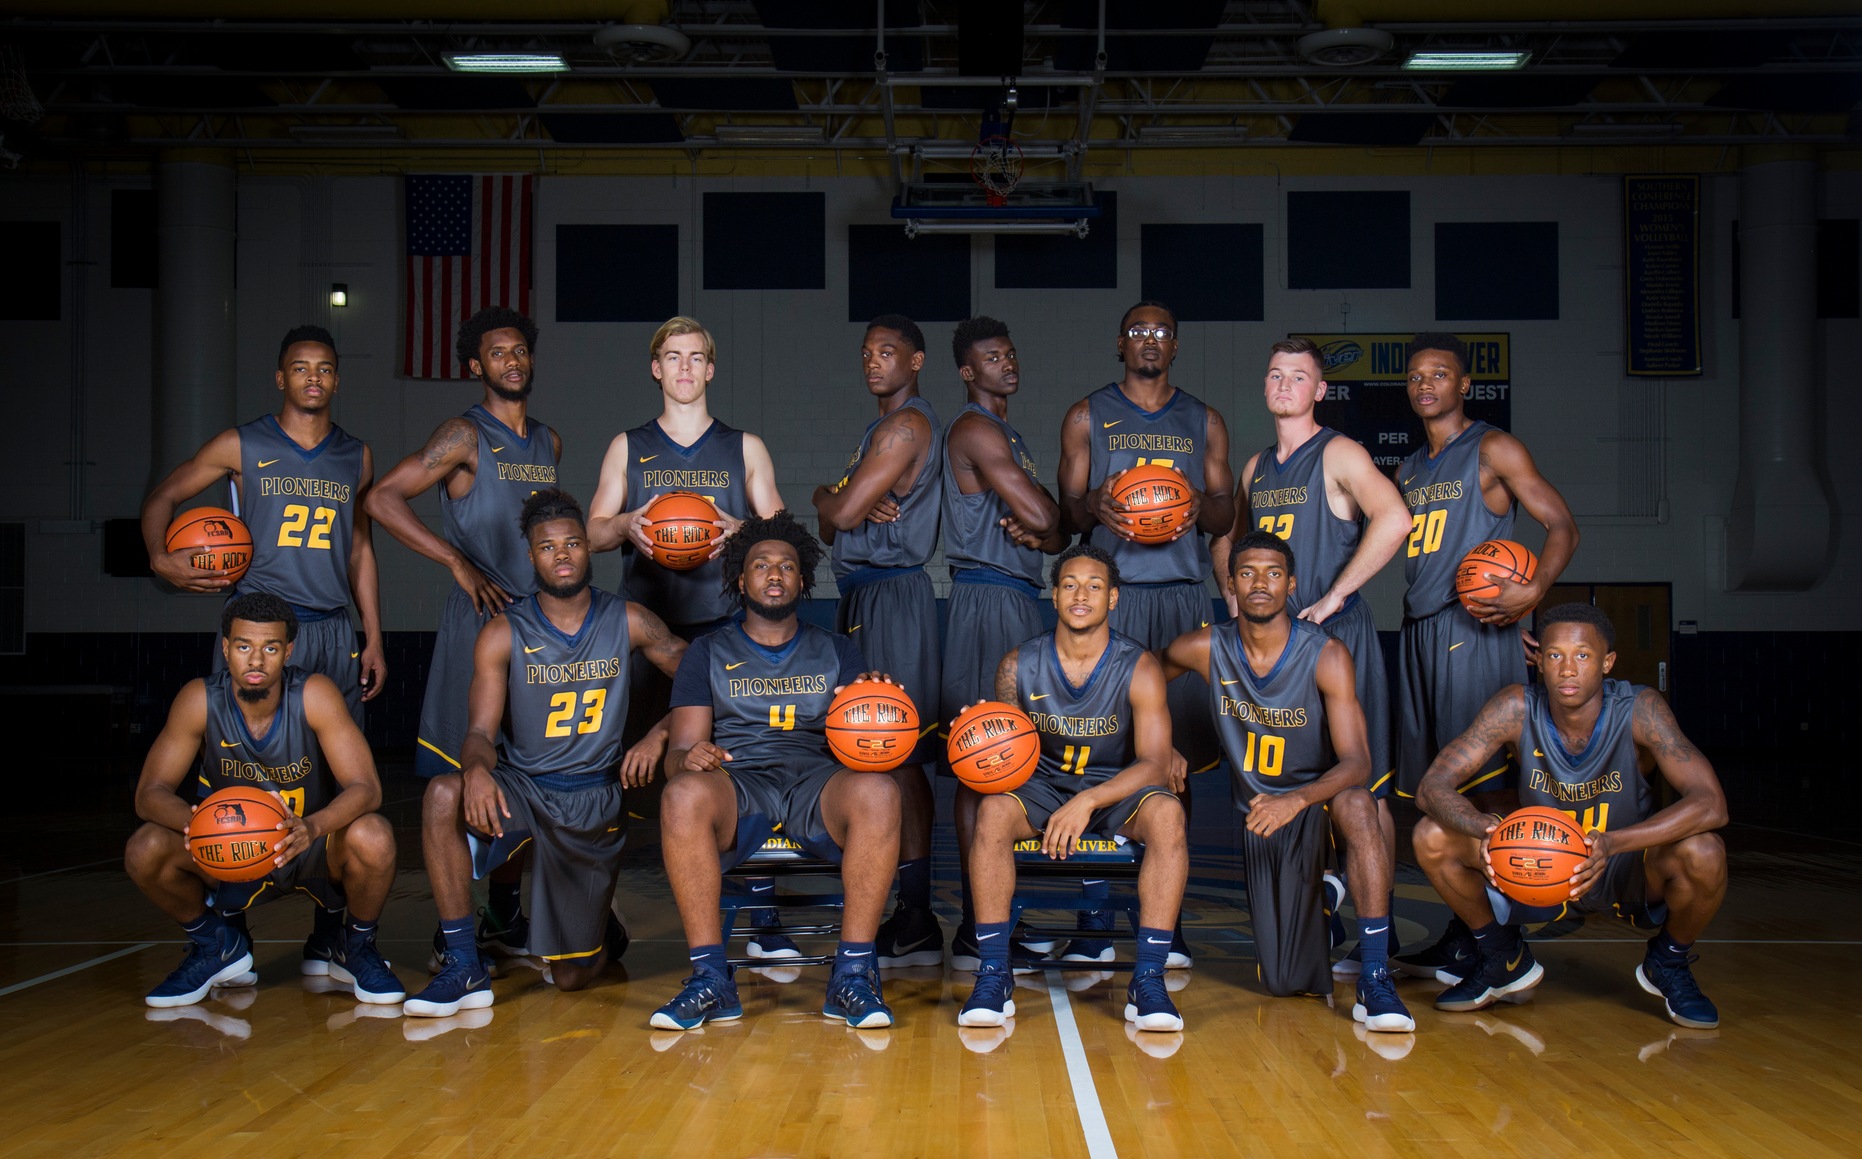 IRSC Men’s Basketball Team Takes On No. 1 Team In The Nation